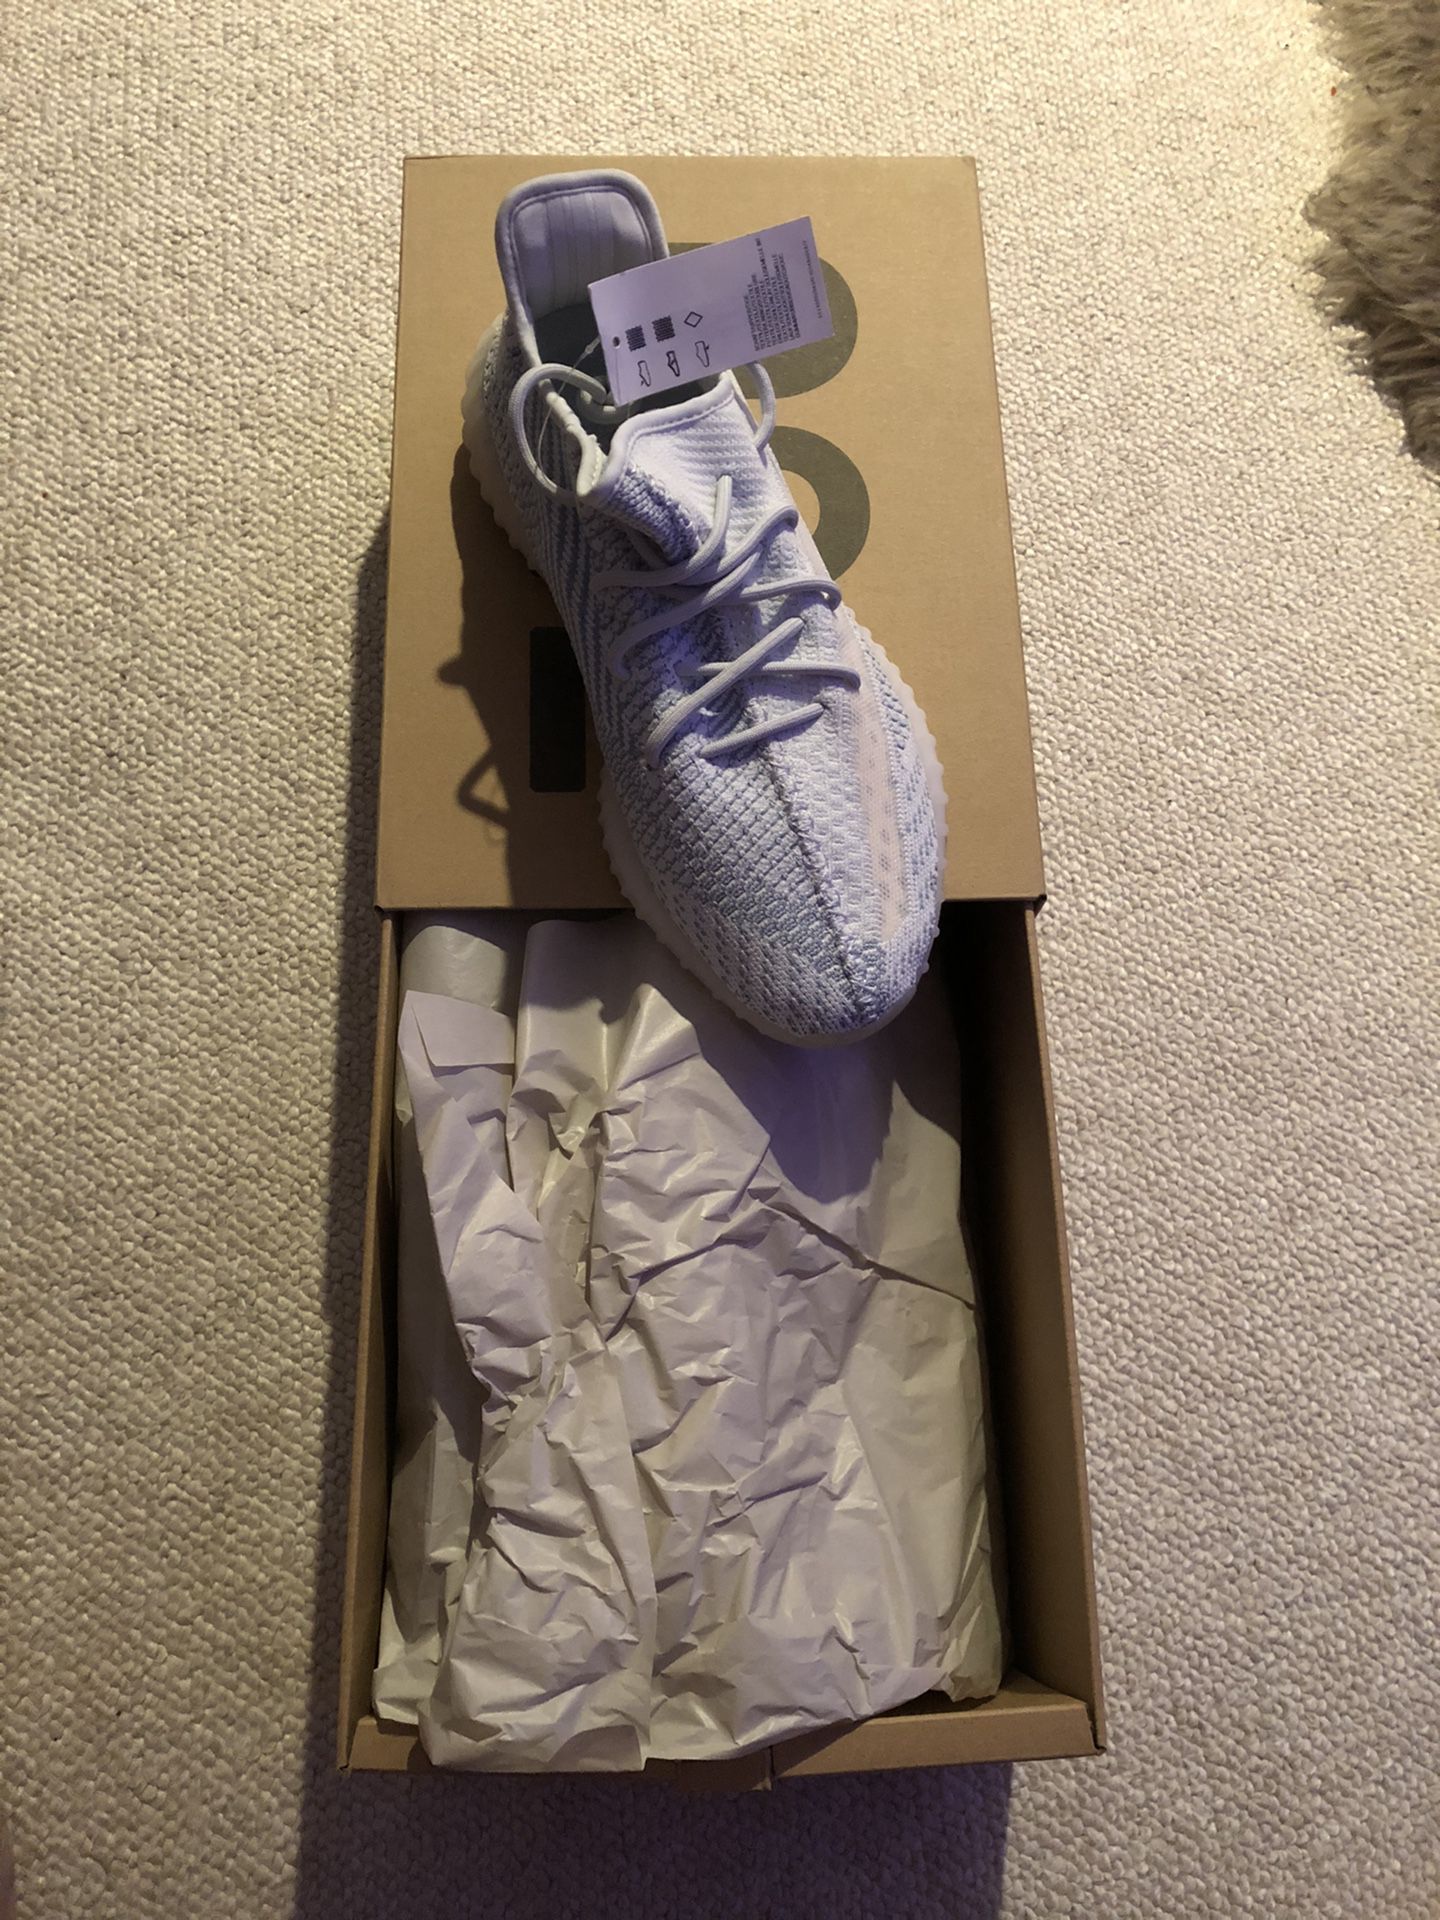 Brand New Adidas Yeezy Boost 350 V2 Cloud White size 11 (100% Authentic)